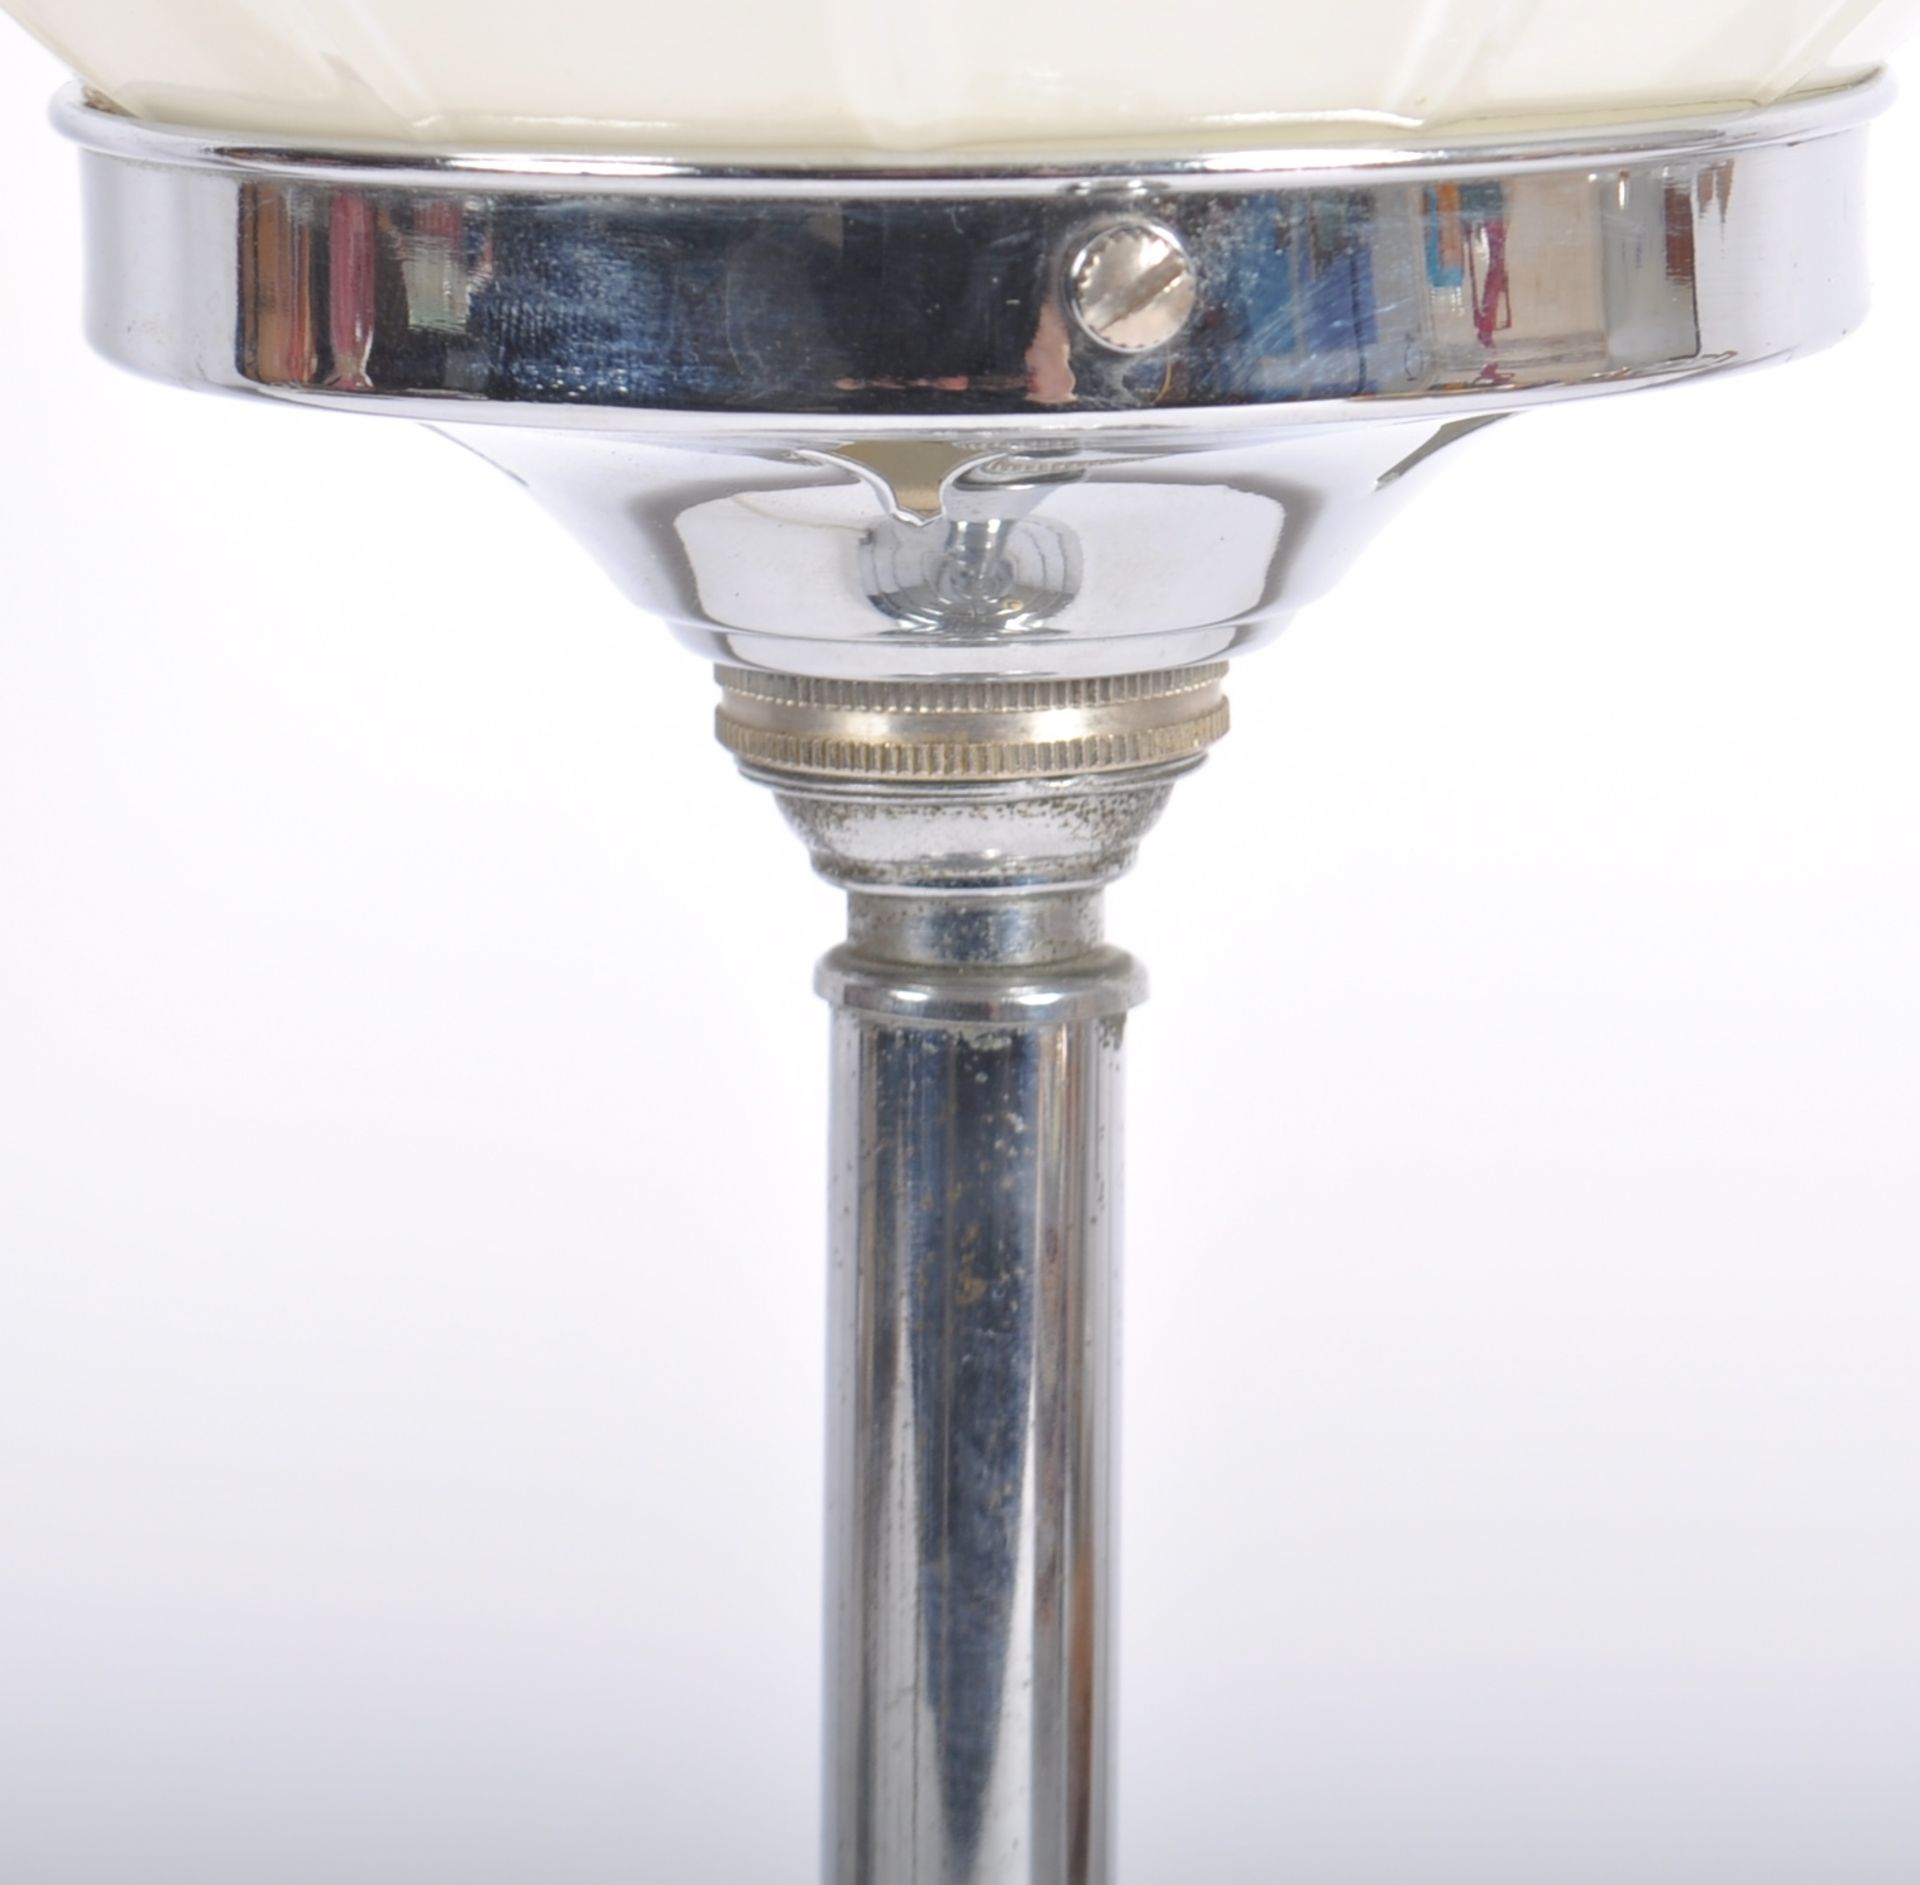 VINTAGE ART DECO GLASS AND CHROME TABLE LAMP - Image 5 of 5